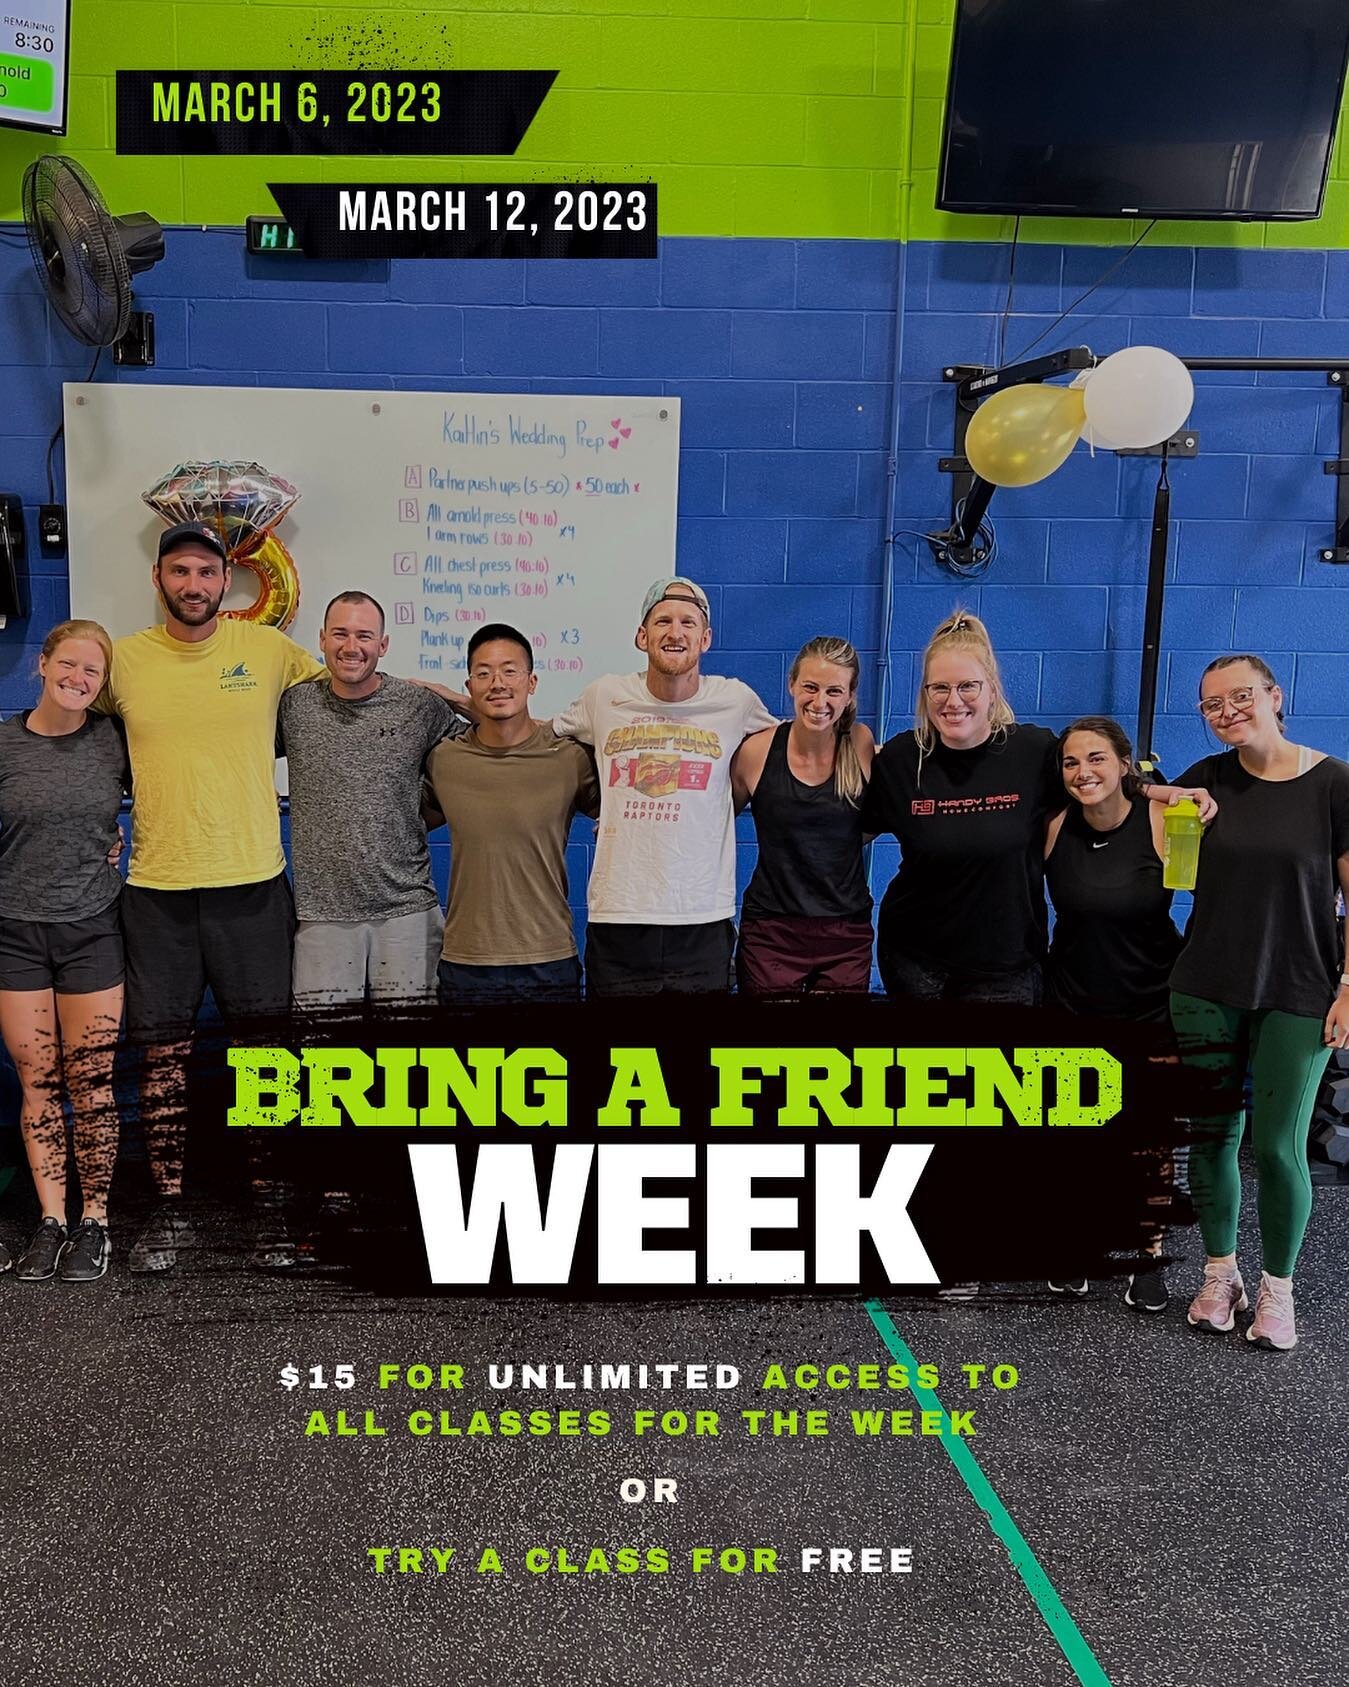 ⏰YOU KNOW WHAT TIME IT IS⏰

⚡️Bring A Friend Week is back!⚡️

From March 6th ➡️ March 12th, bring your peeps in! 

Bring your peeps in for a FREE class (you can bring a different friend every day) 

OR 

Your peeps have full access to the gym for the